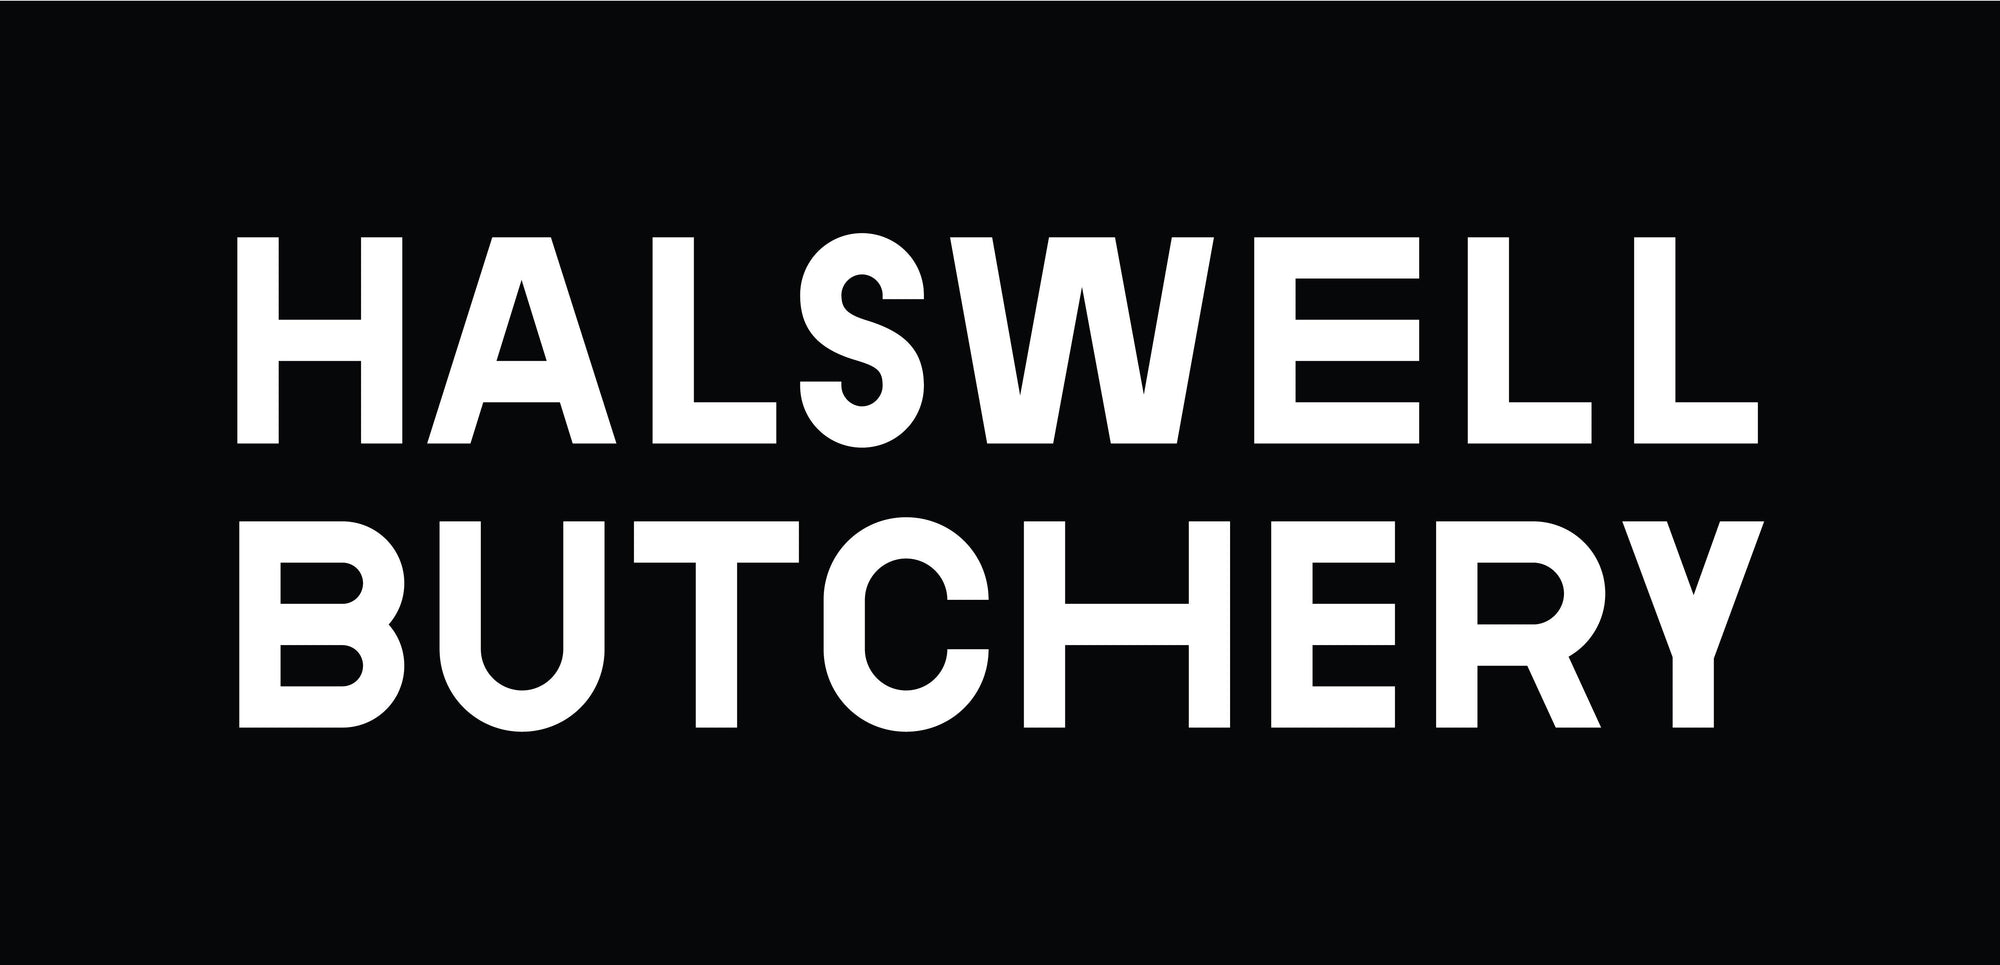 Gift Voucher - Halswell Butchery